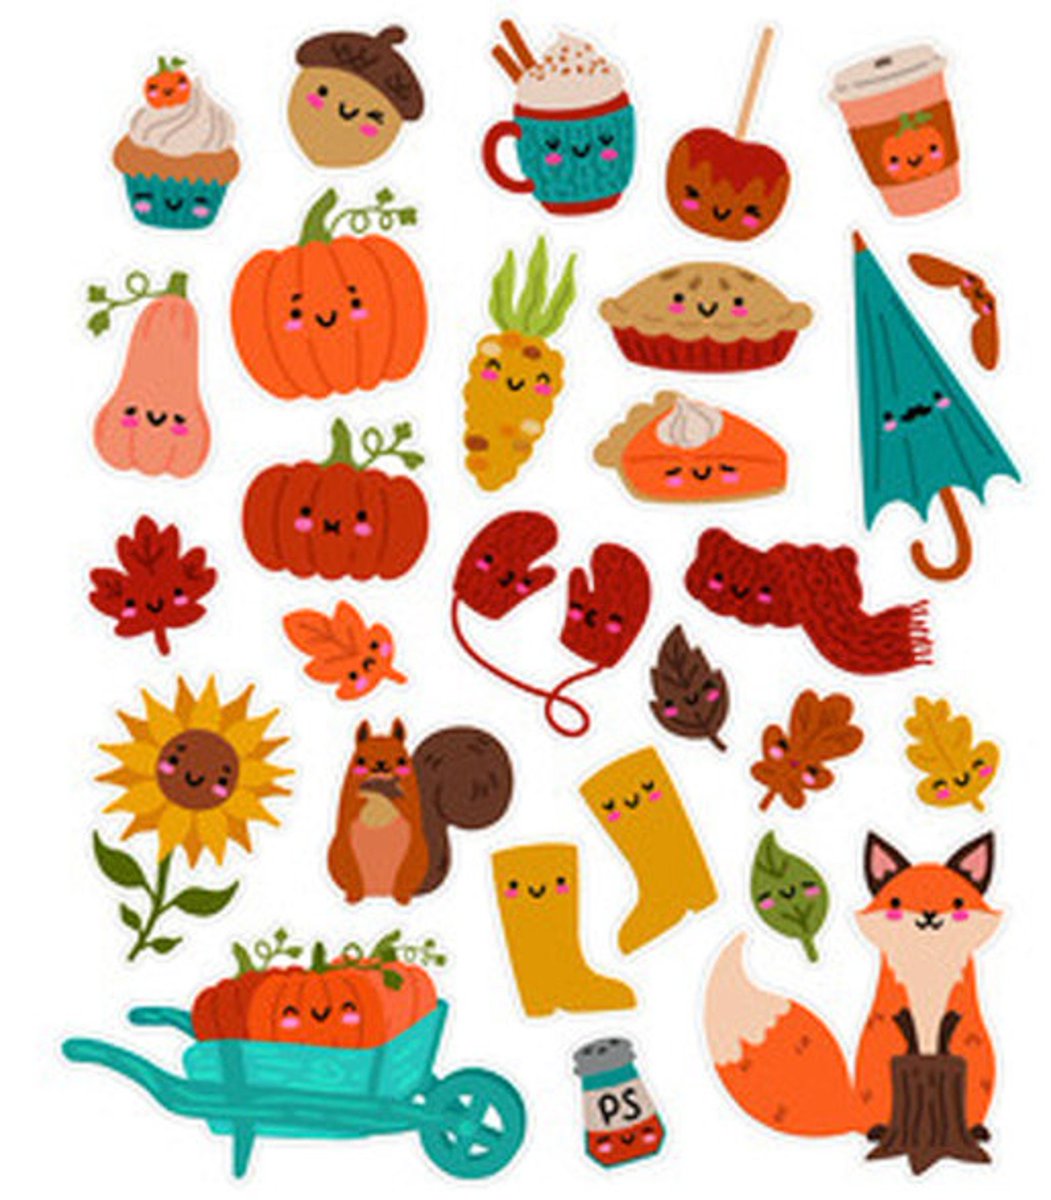 Kawaii Fall Stickers , Fox , Pumpkin , Pie , Leaves , Mitts , Flower , Thanks giving , Food , Kids , Crafts #KidsCrafts #Thanks #StickersFox #PieLeavesMitts #Kawaii #AAmazingPaperCraft #EtsyEmail 👉etsy.com/listing/890646…